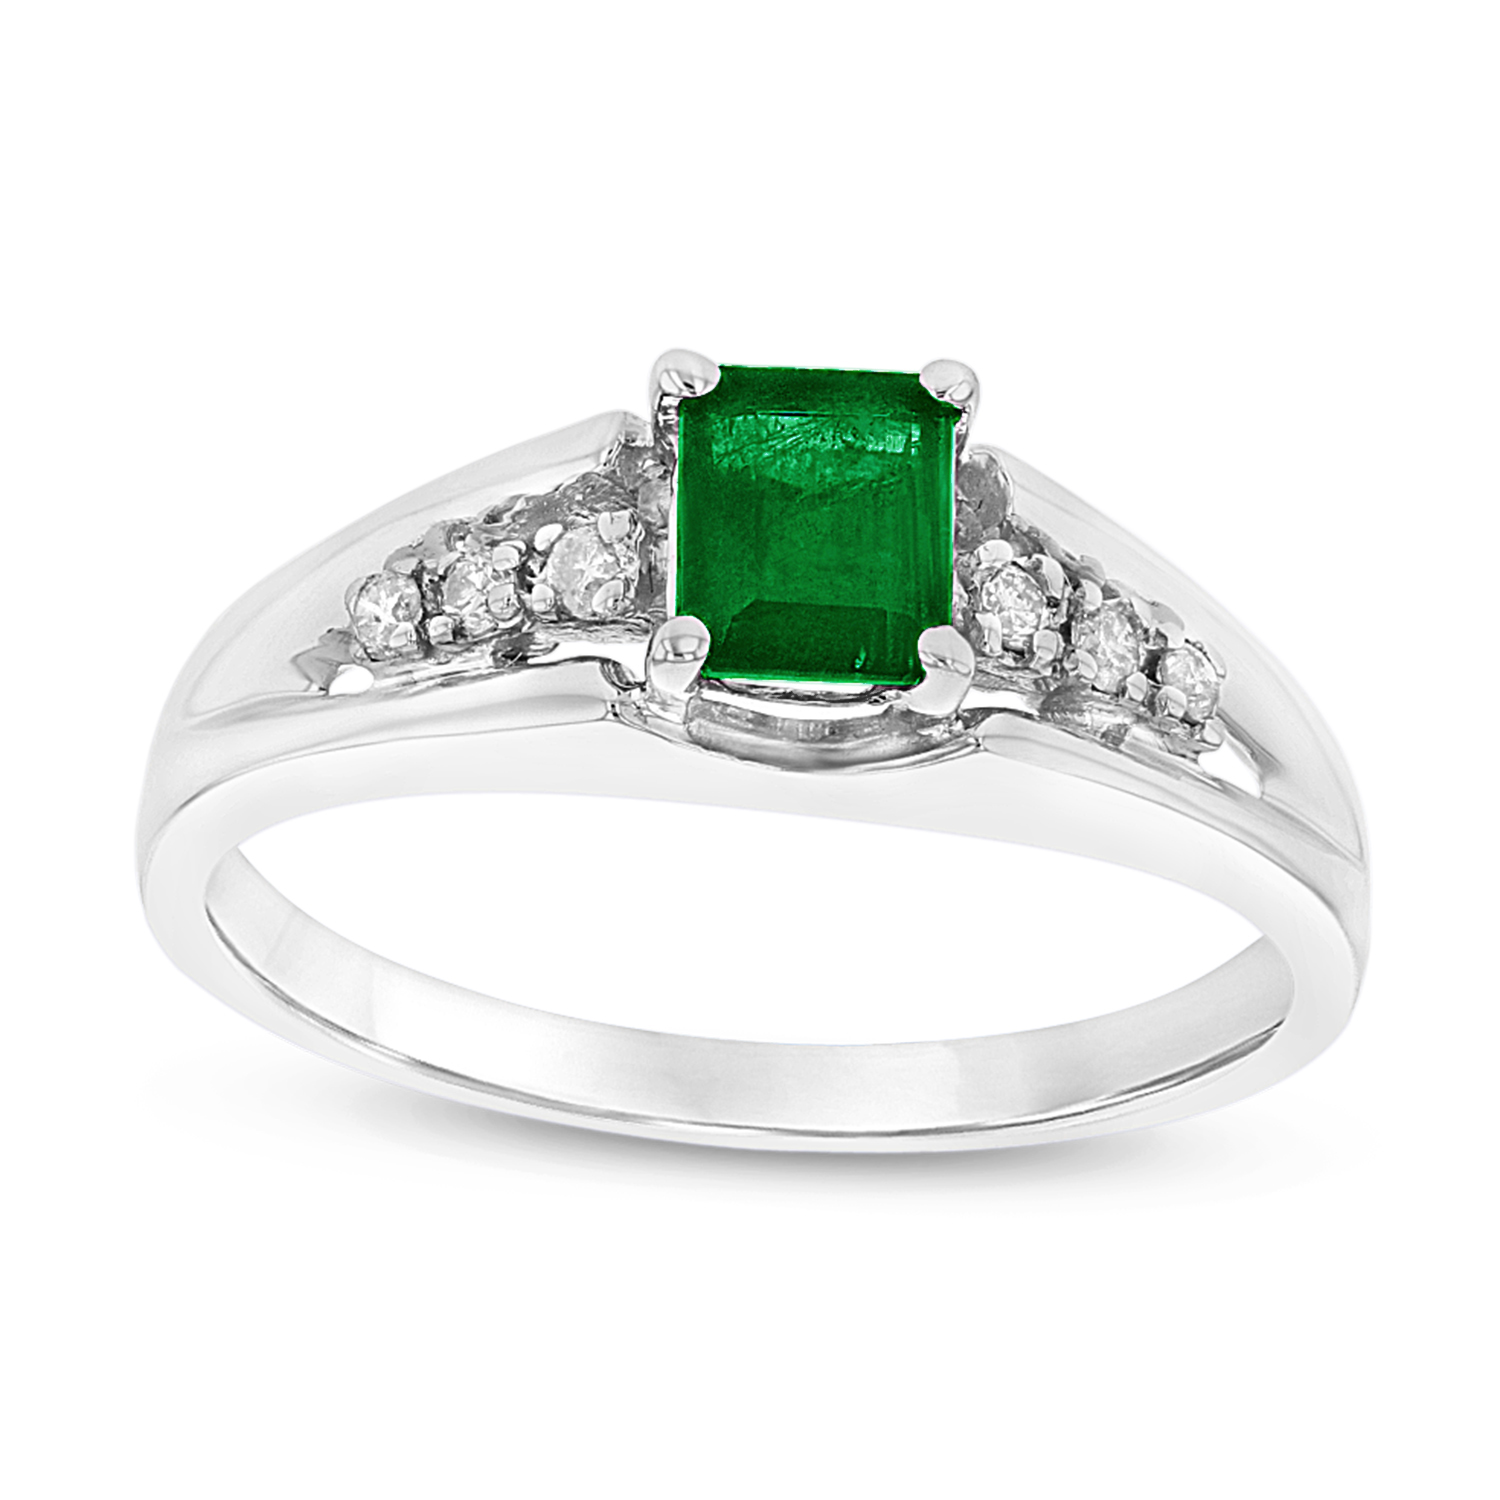 0.58cttw Emerald and Diamond Ring set in 14k Gold